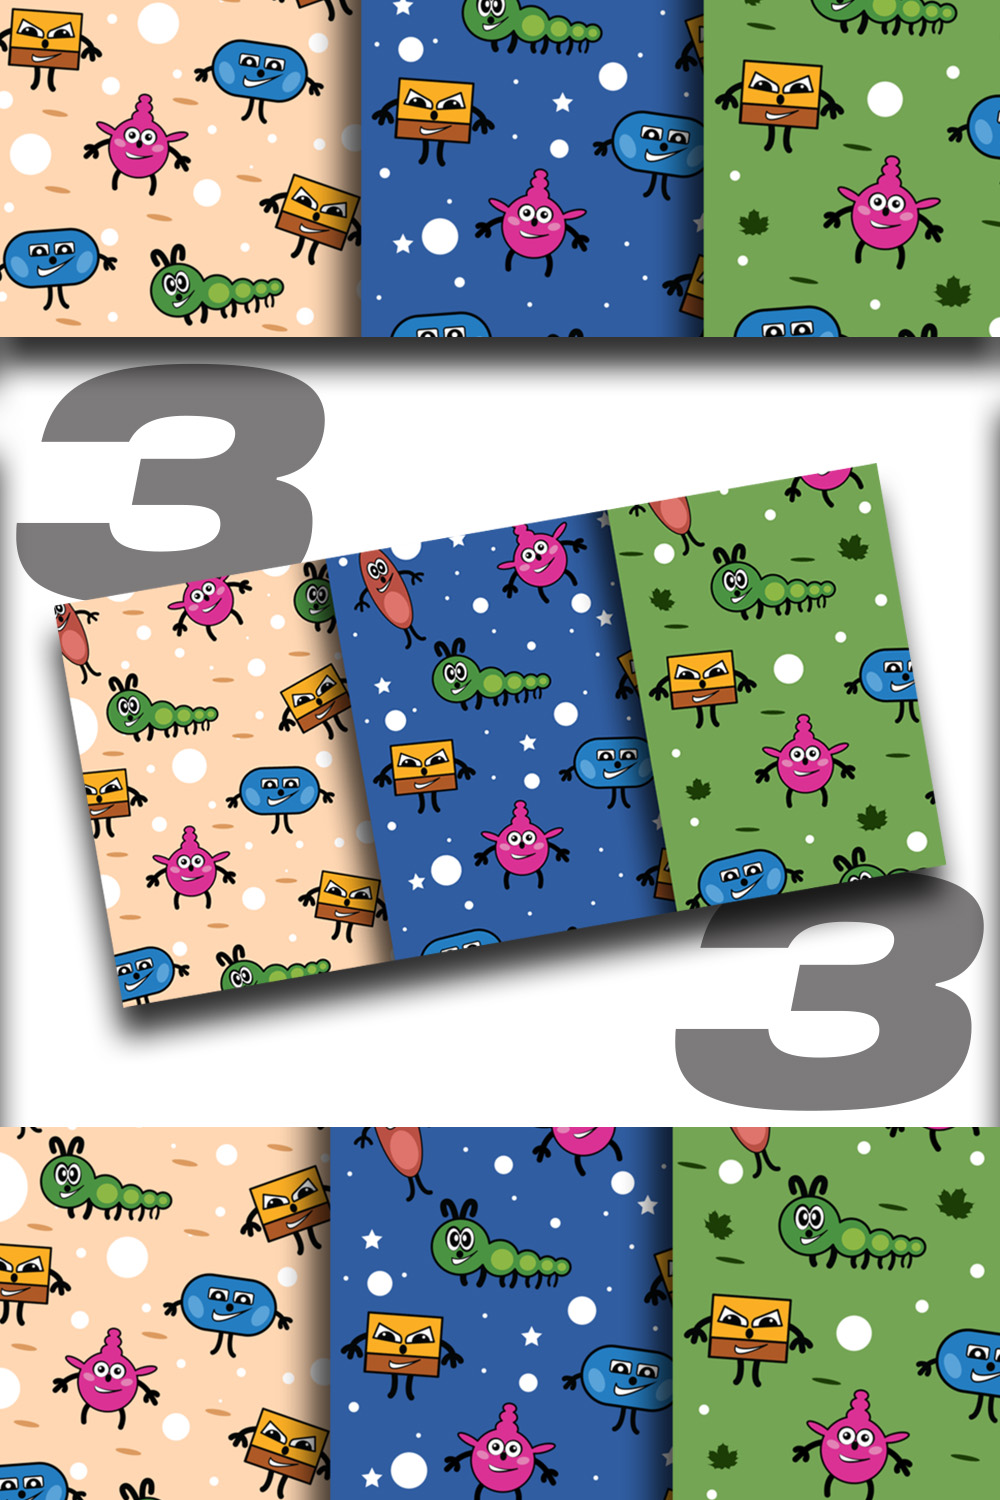 Seamless pattern design for kids room and gift box wrapping pinterest preview image.